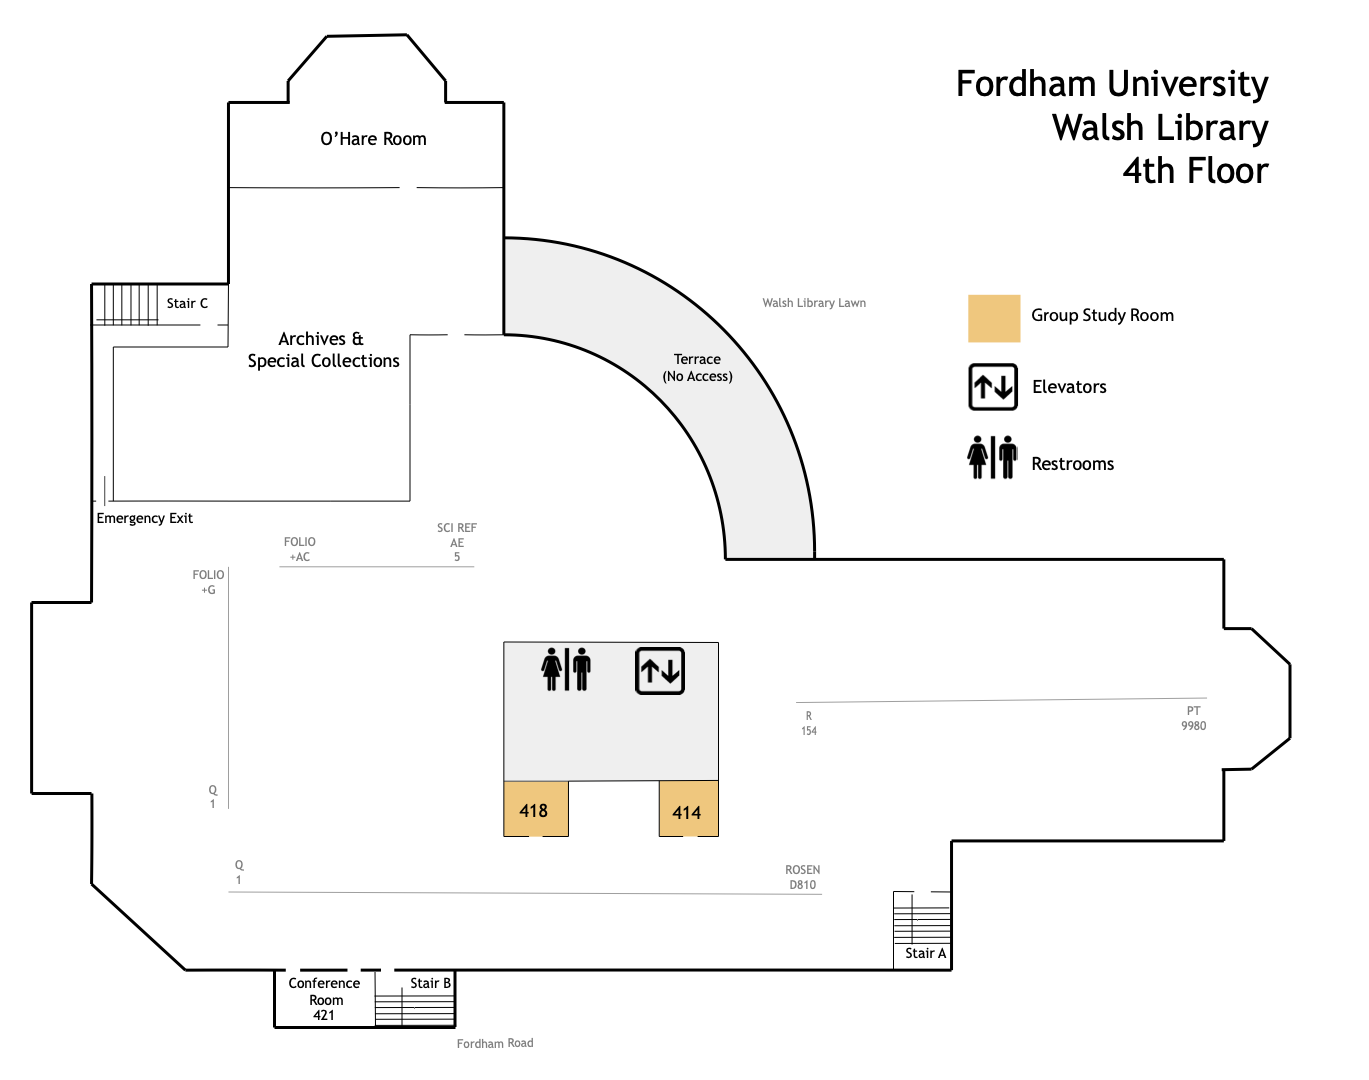 floor plan of Walsh Library, 4th floor, show 2 group study rooms 414 and 418